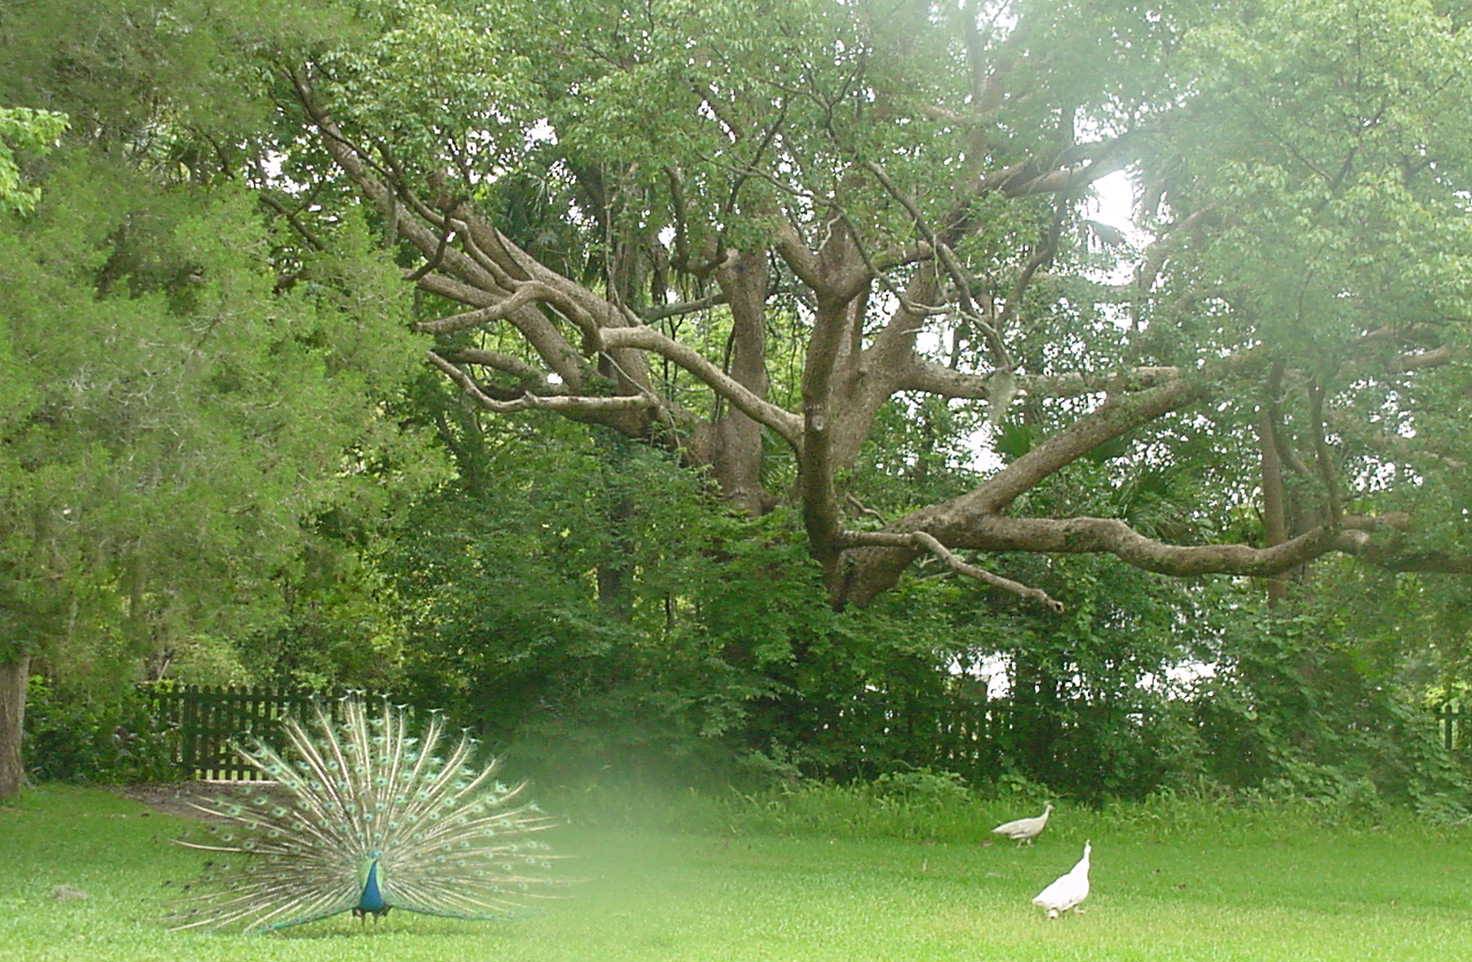 The grounds are most incredible.  There are several peacocks around.